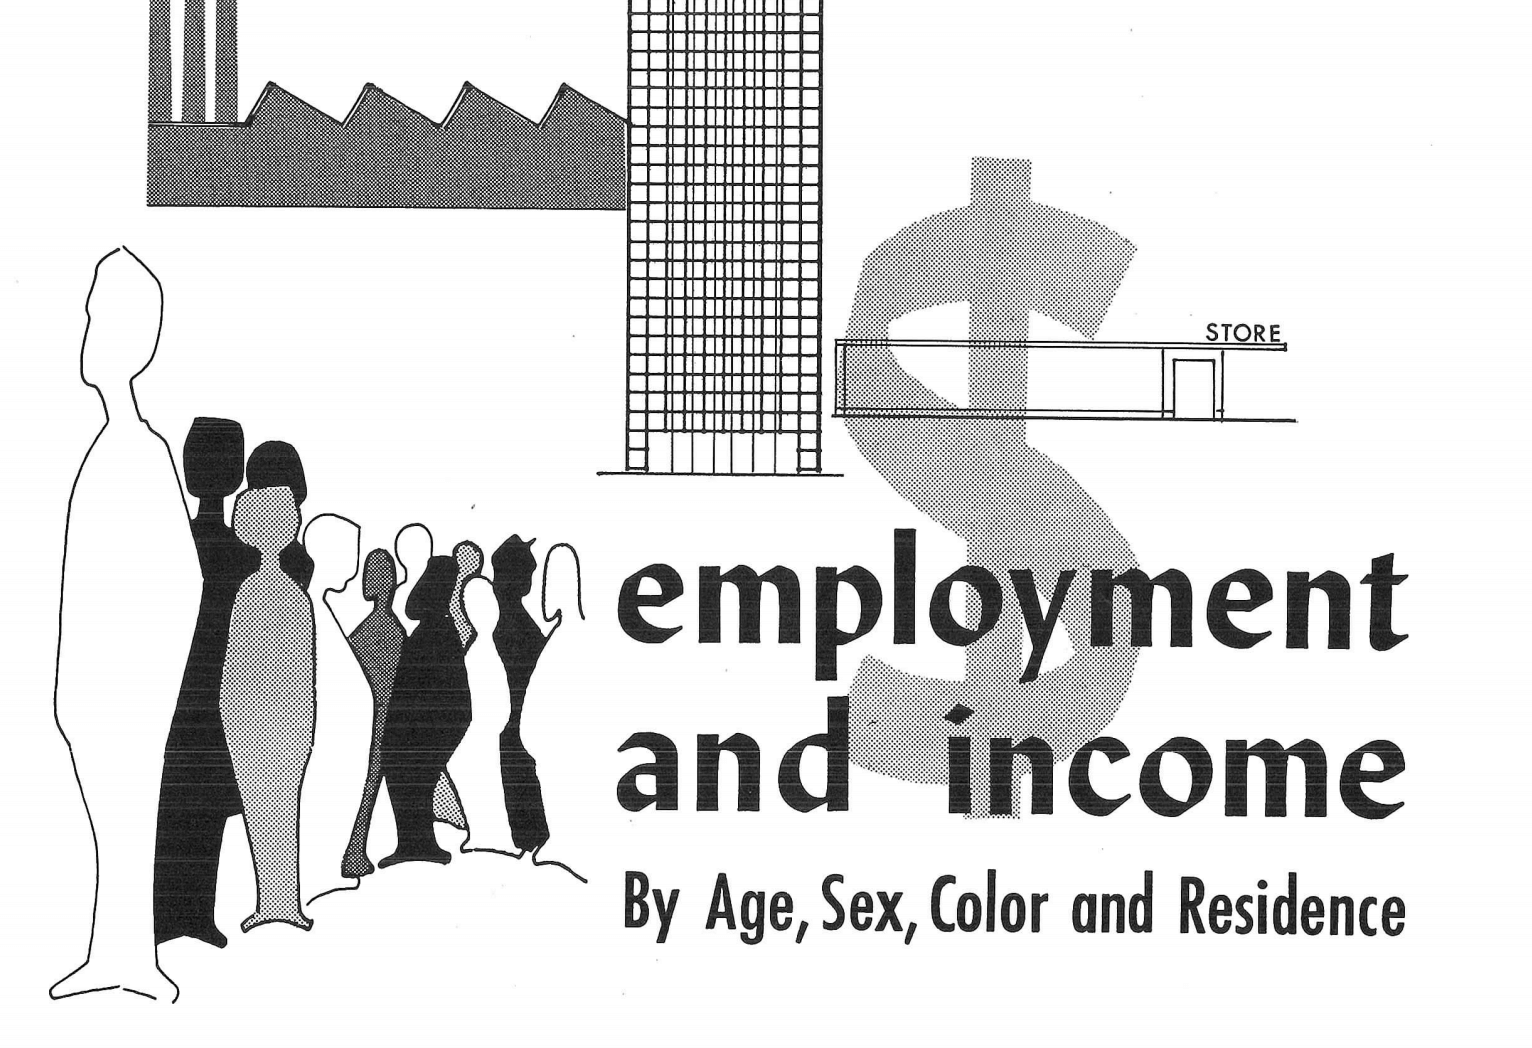 "Employment and Income By Age, Sex, Color and Residence"